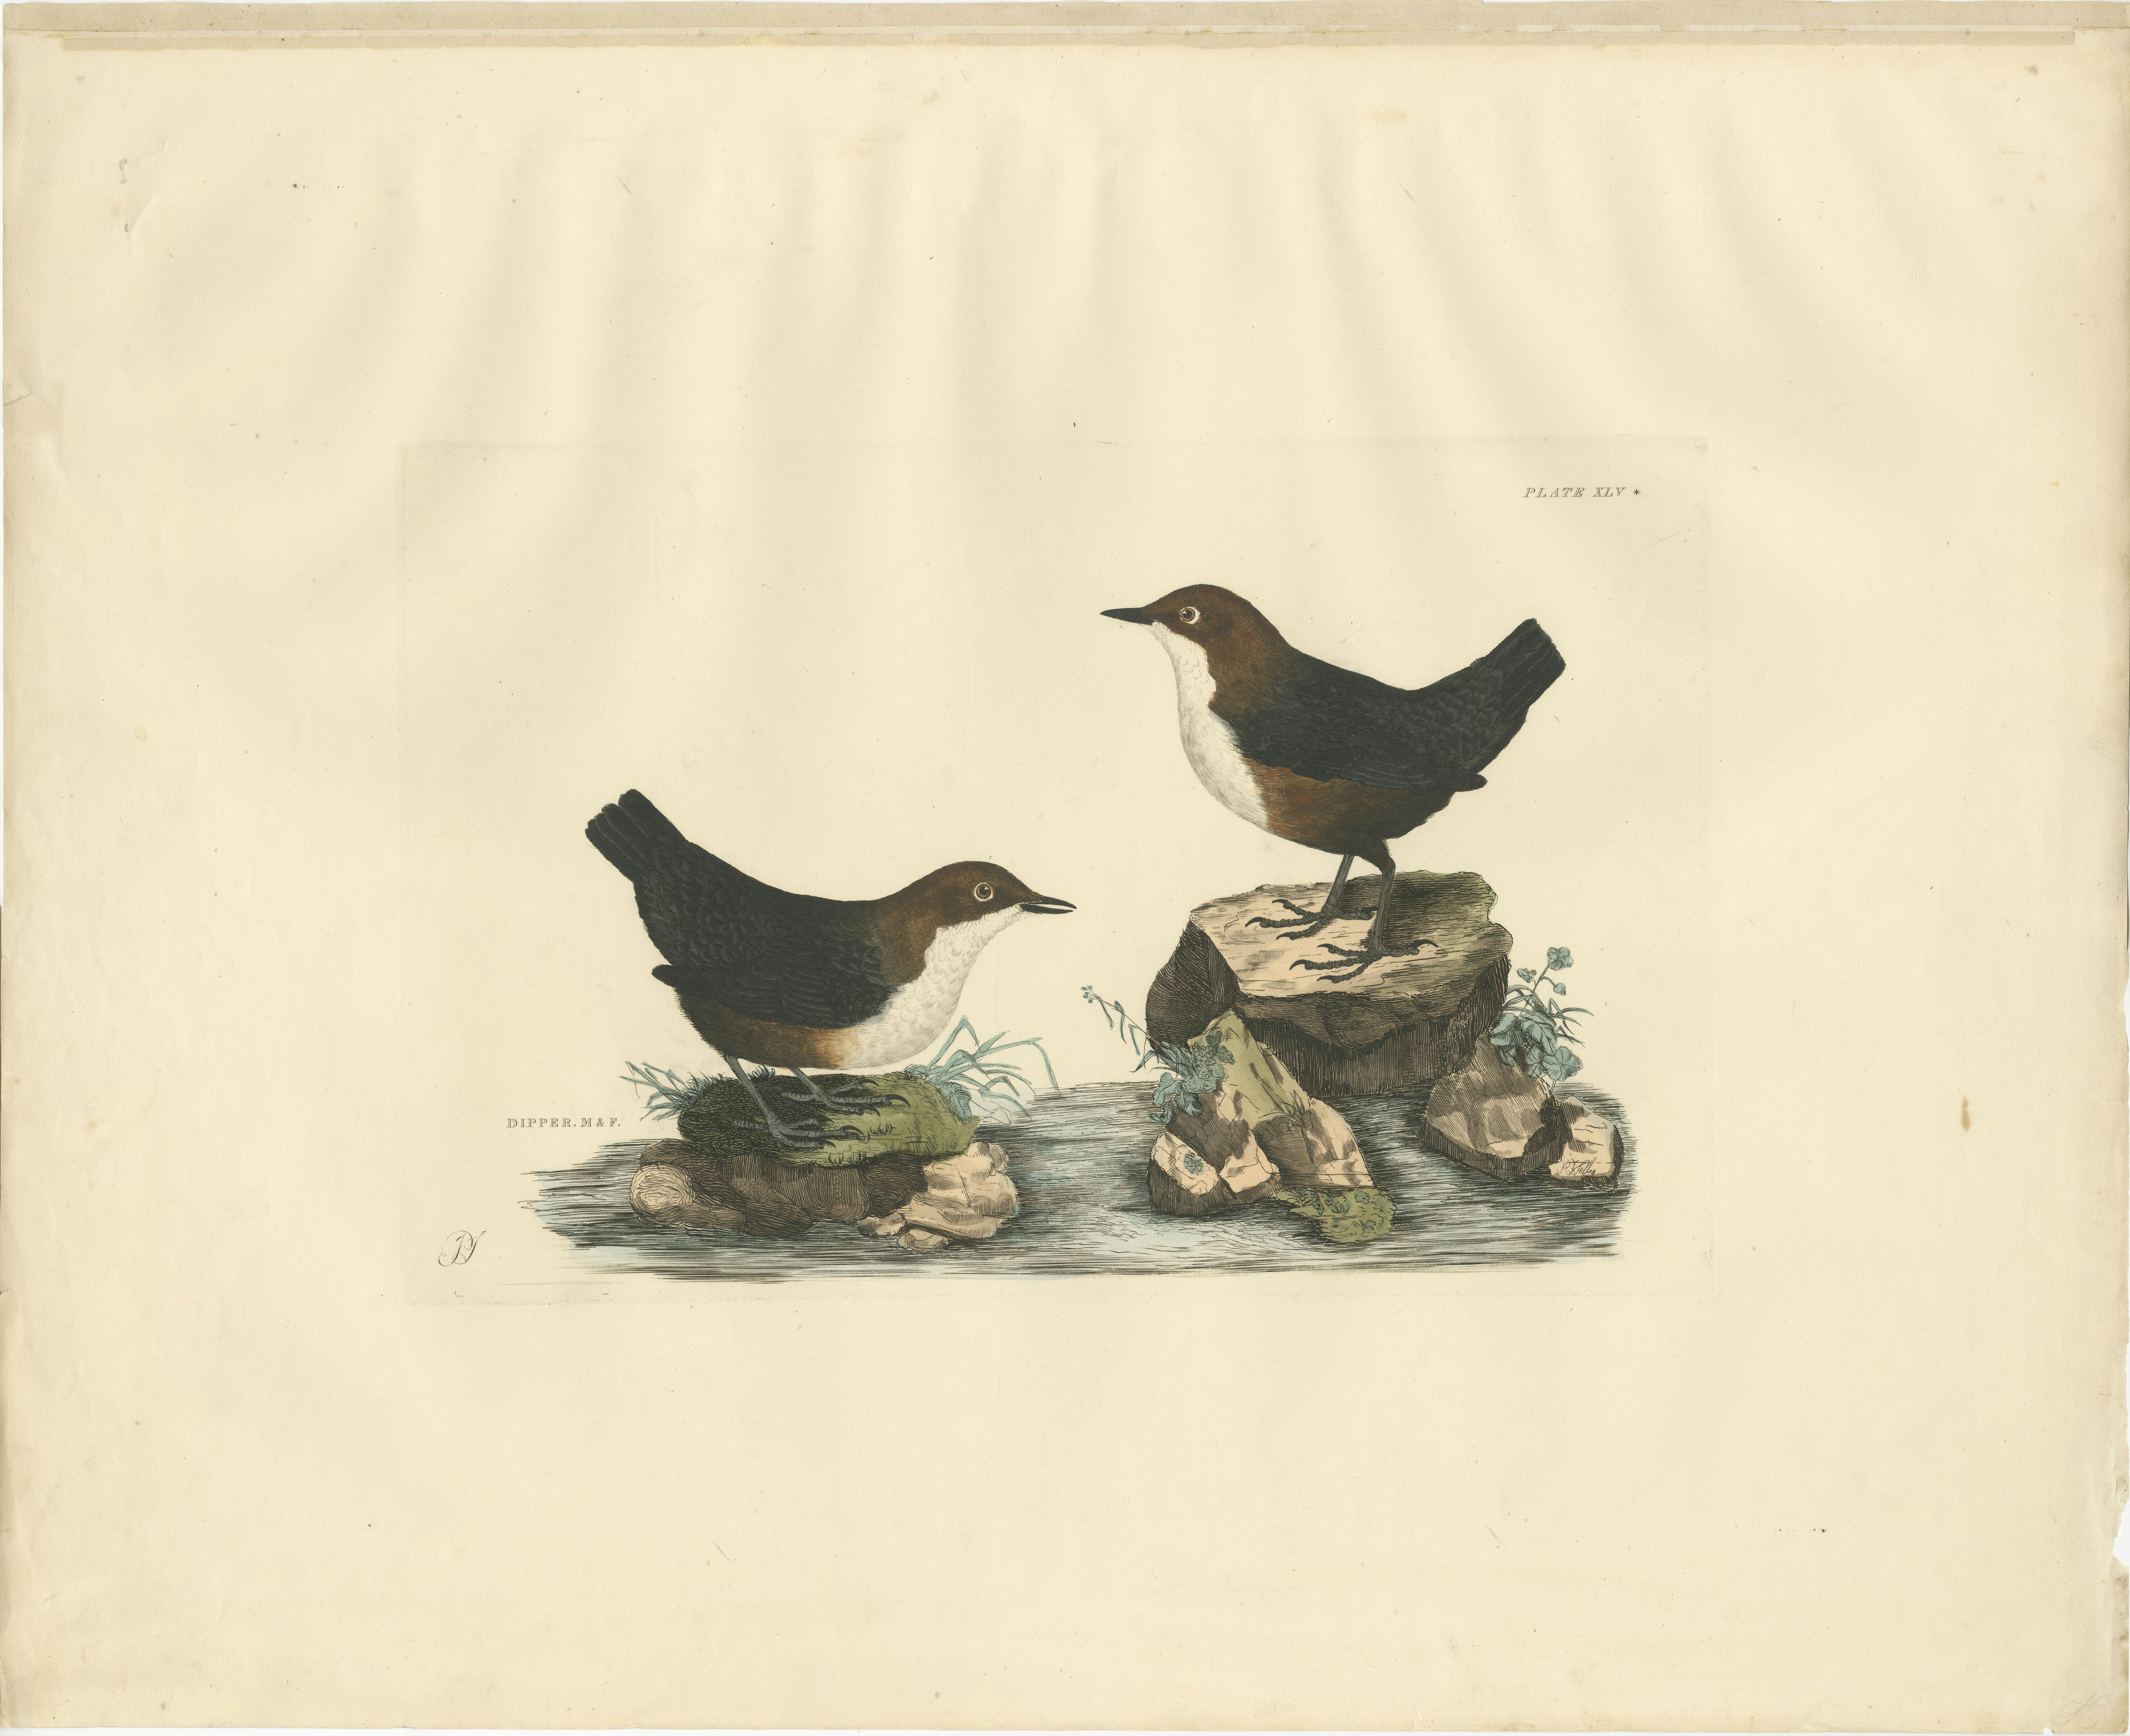 This original antique engraving features a pair of Dippers, also known as water ouzels, which are small, stout, aquatic songbirds. This print from Prideaux John Selby's 